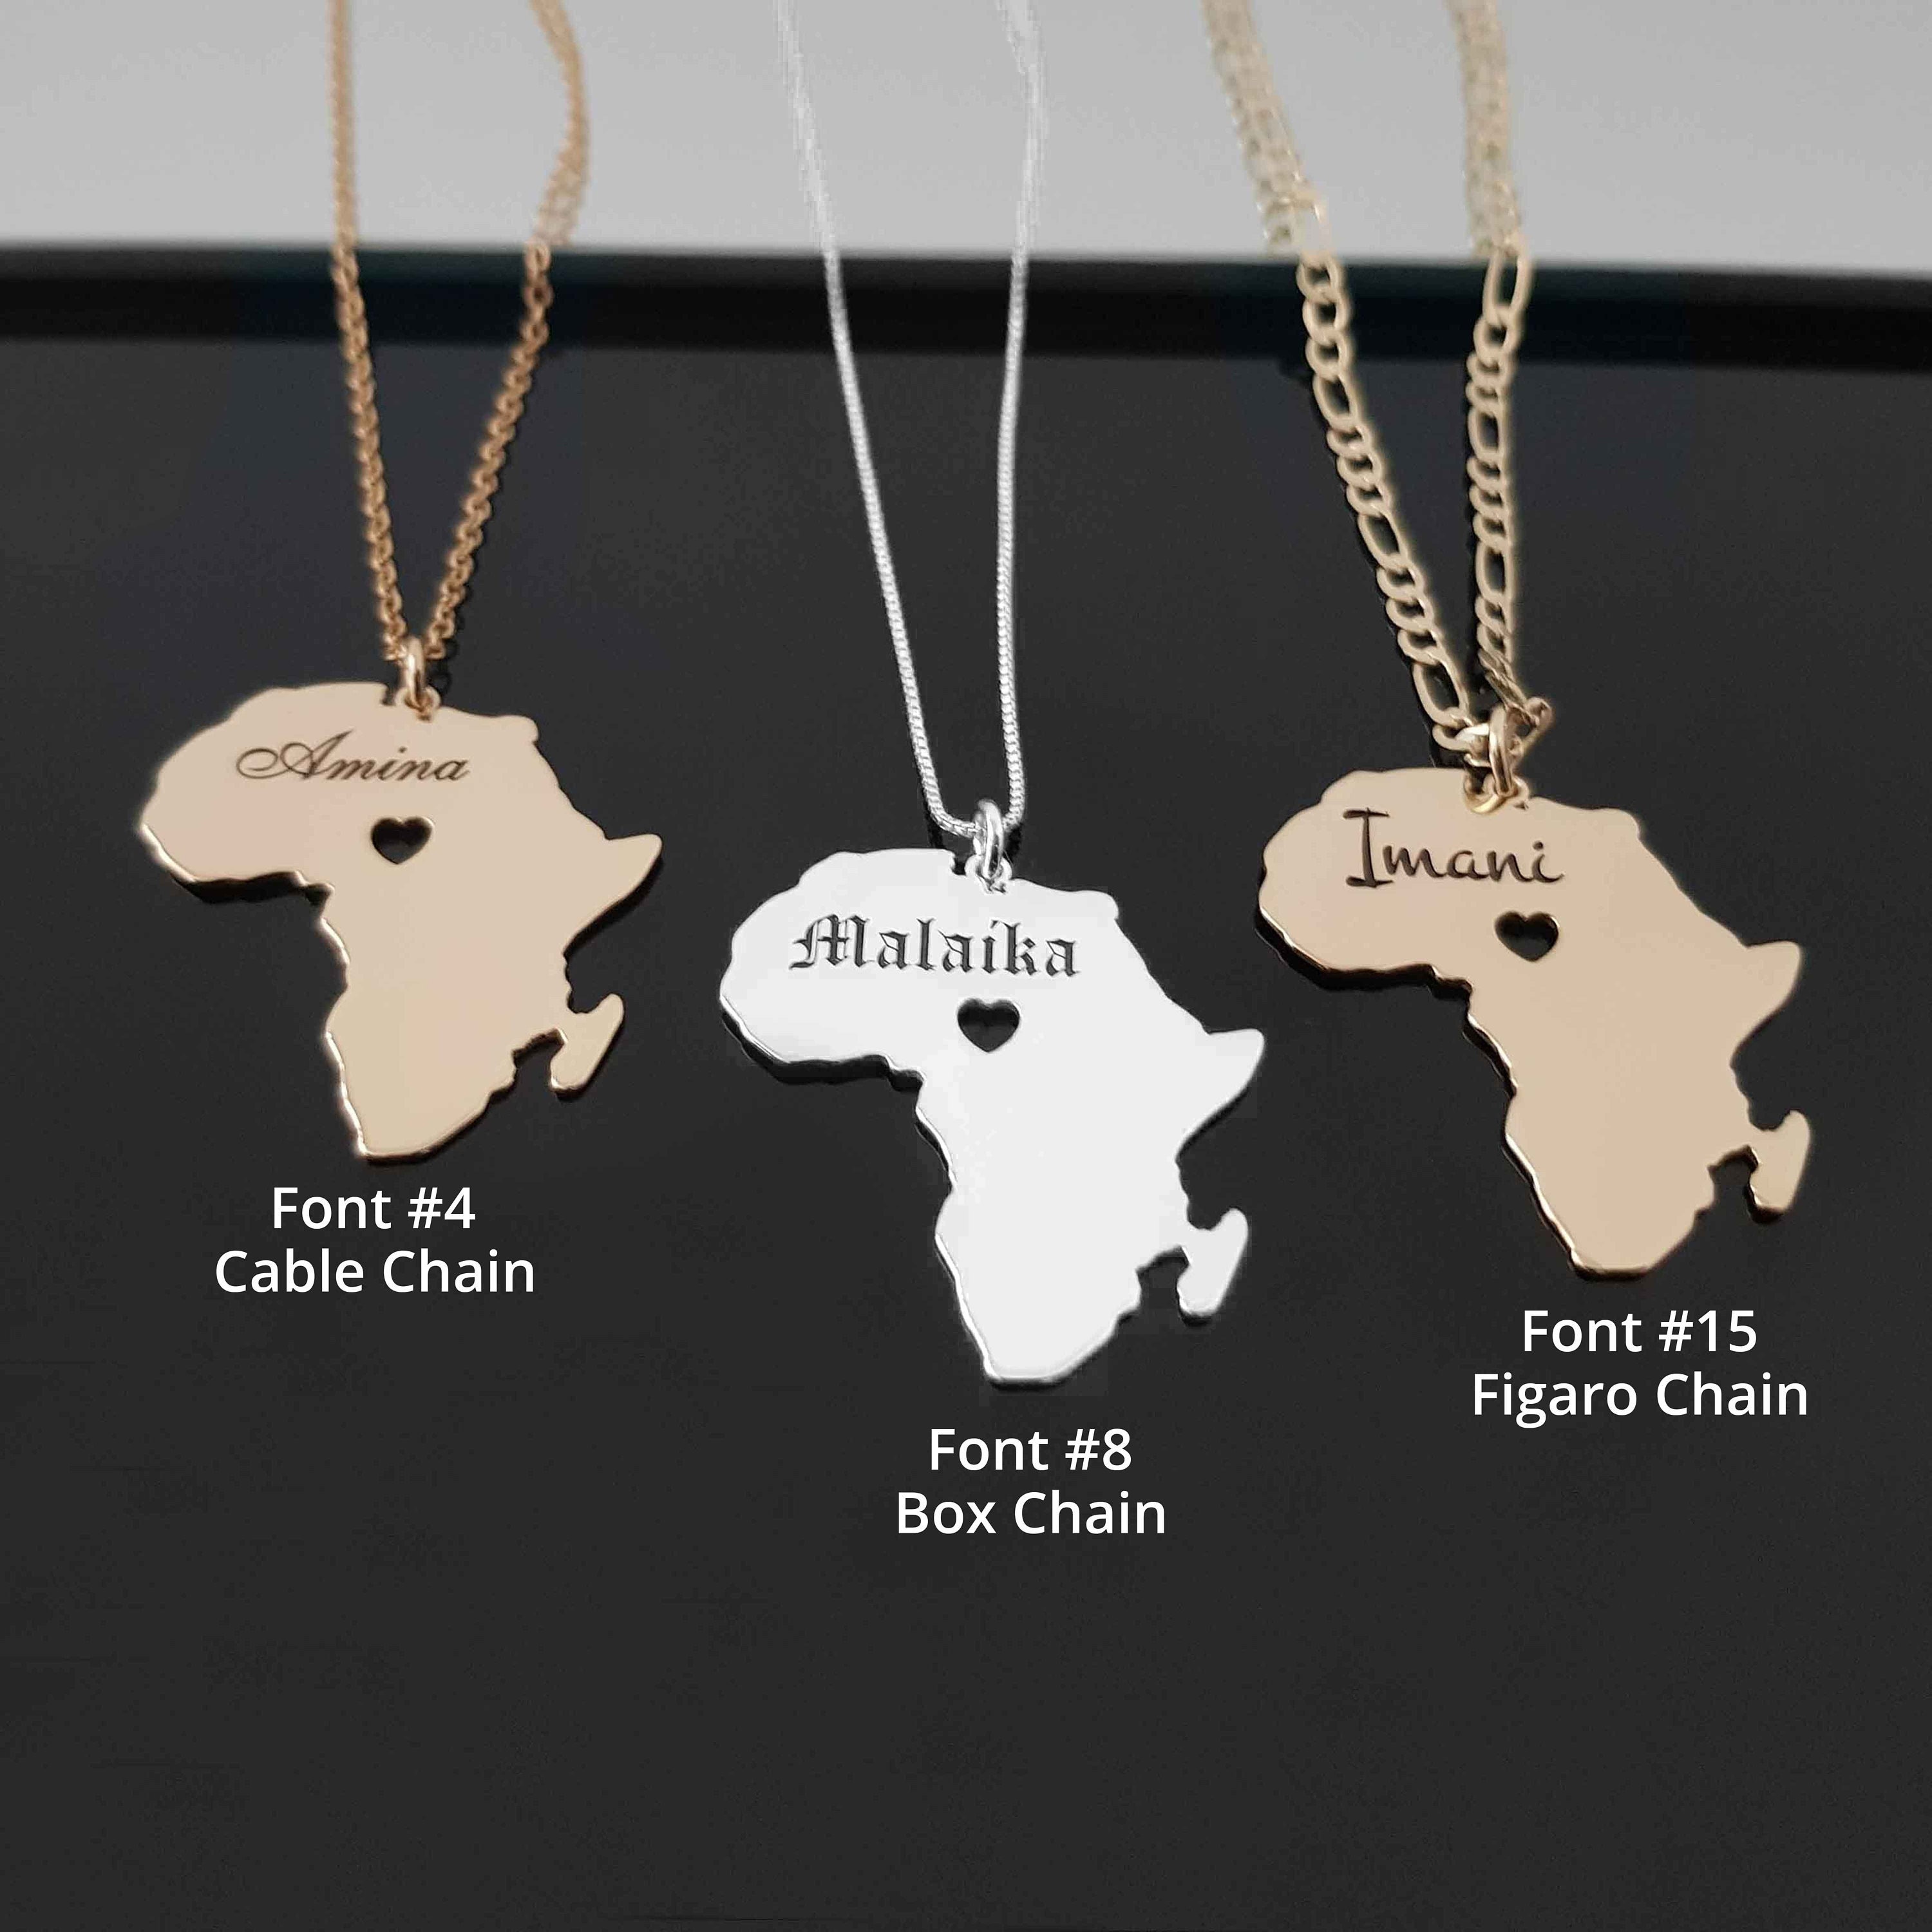 Buy Africa Map Pendant Necklaces Heart African of Maps Jewelry Charms Heart  Map at Amazon.in